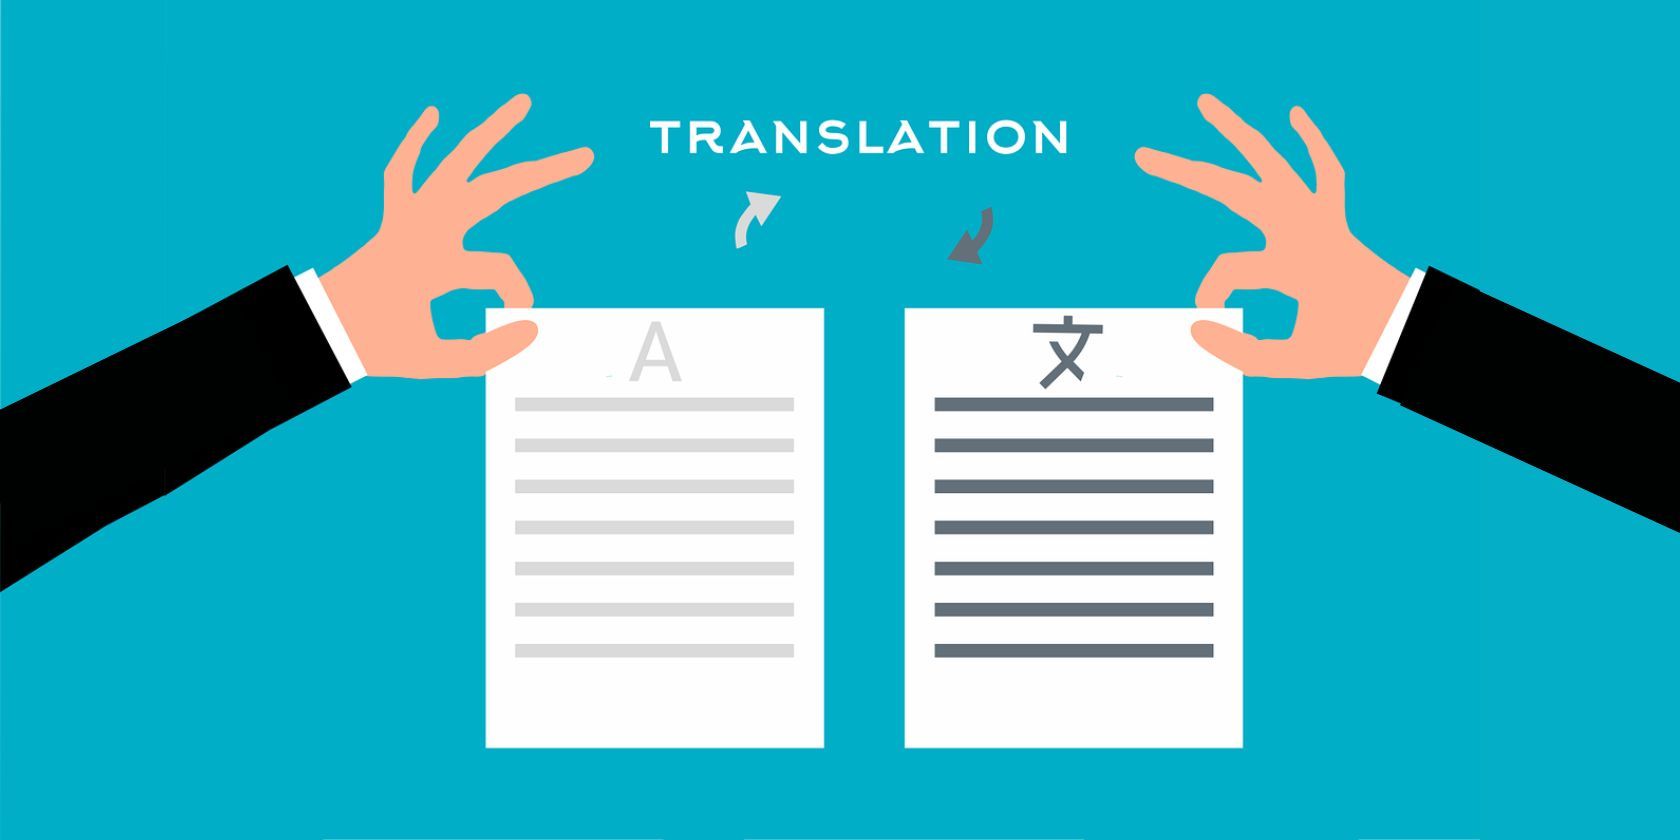 Translating a document from one language to another language